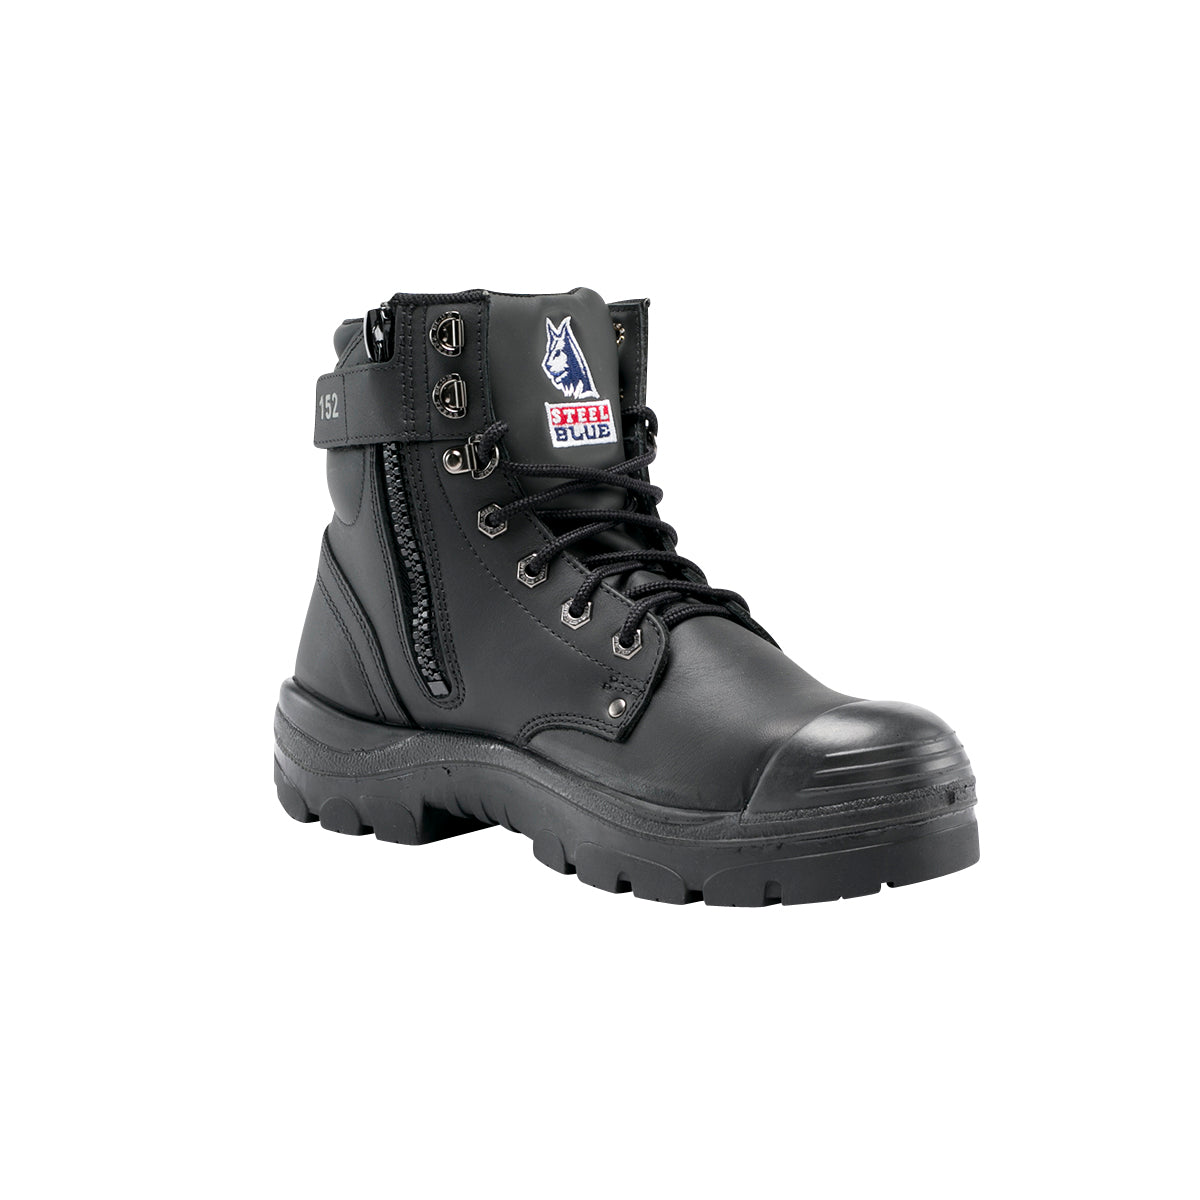 Steel Blue 332152 - Argyle Safety Lace up Boot with Zip and Bump Cap